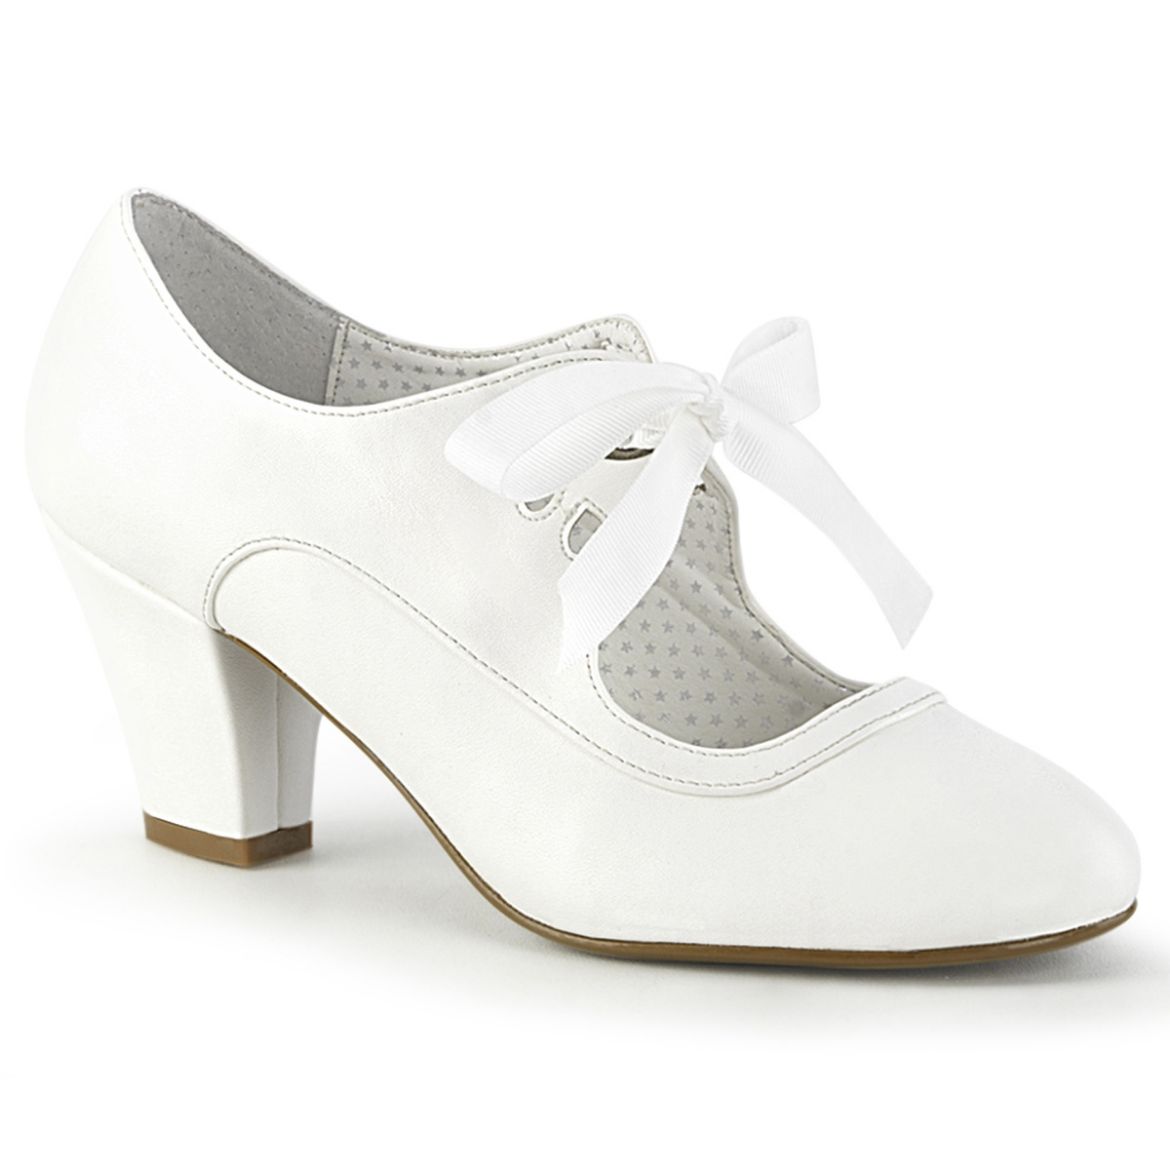 Product image of Pin Up Couture WIGGLE-32 White Faux Leather 2 1/2 Inch Cuben Heel Mary Jane Pump w/Ribbon Tie